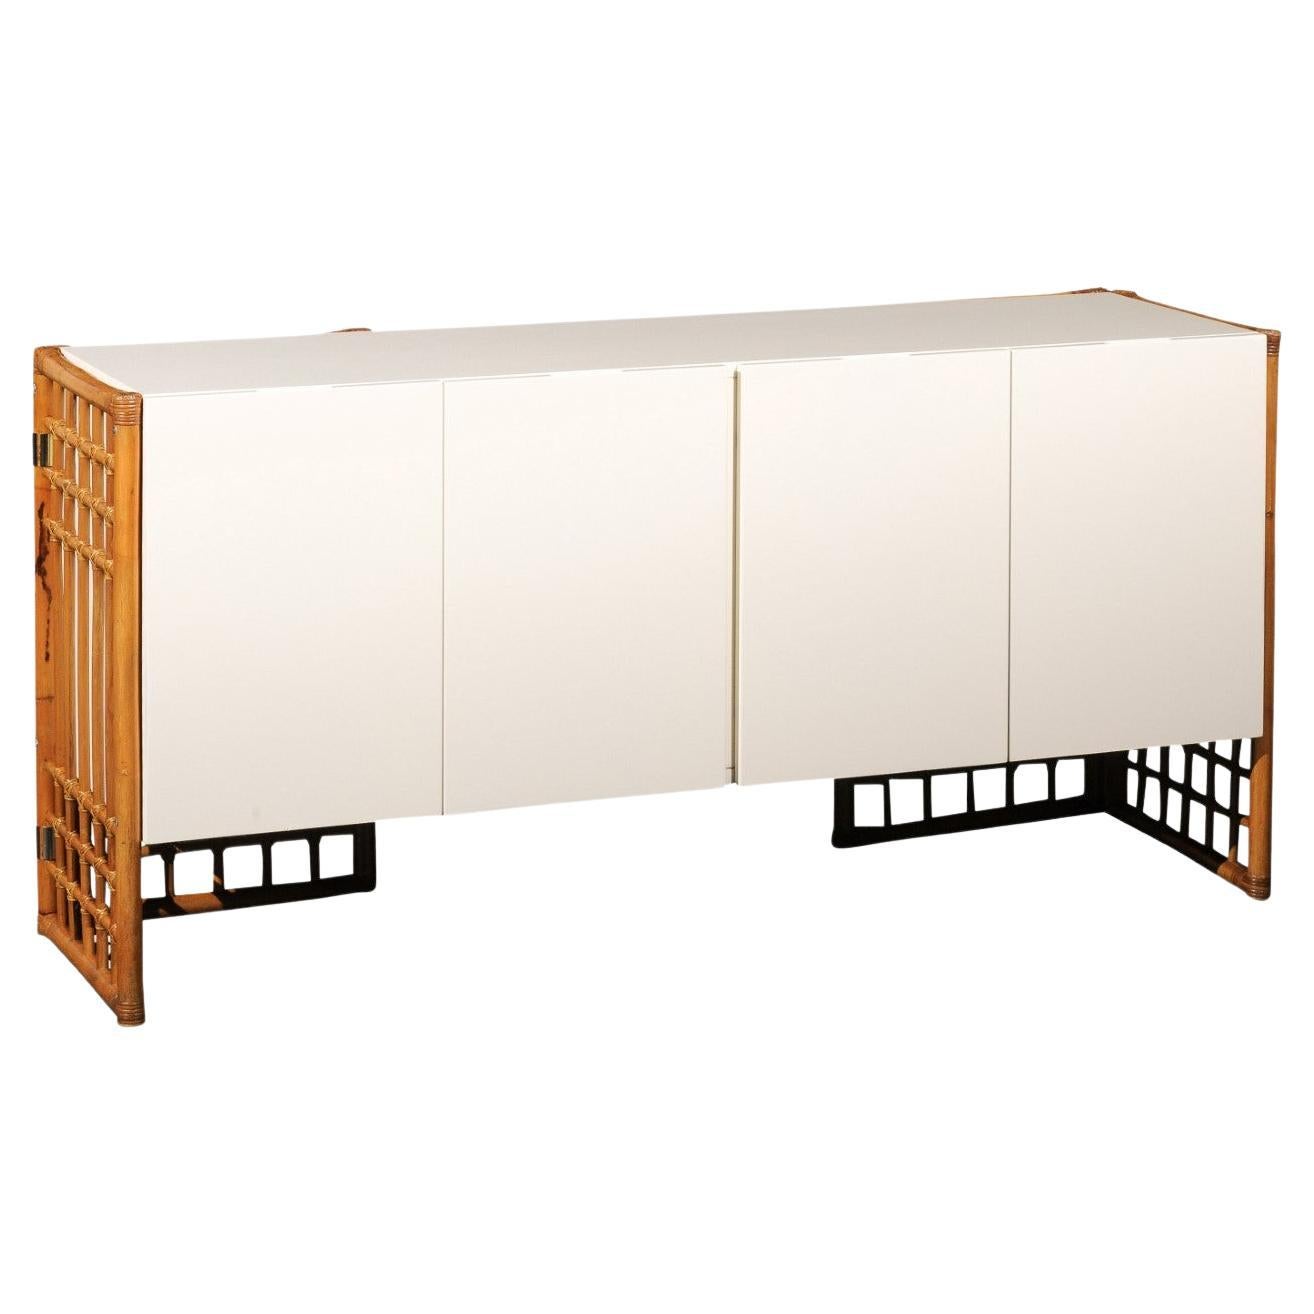 Sleek Restored Cream Lacquer Cabinet with Rattan and Cane Accents, circa 1975 For Sale